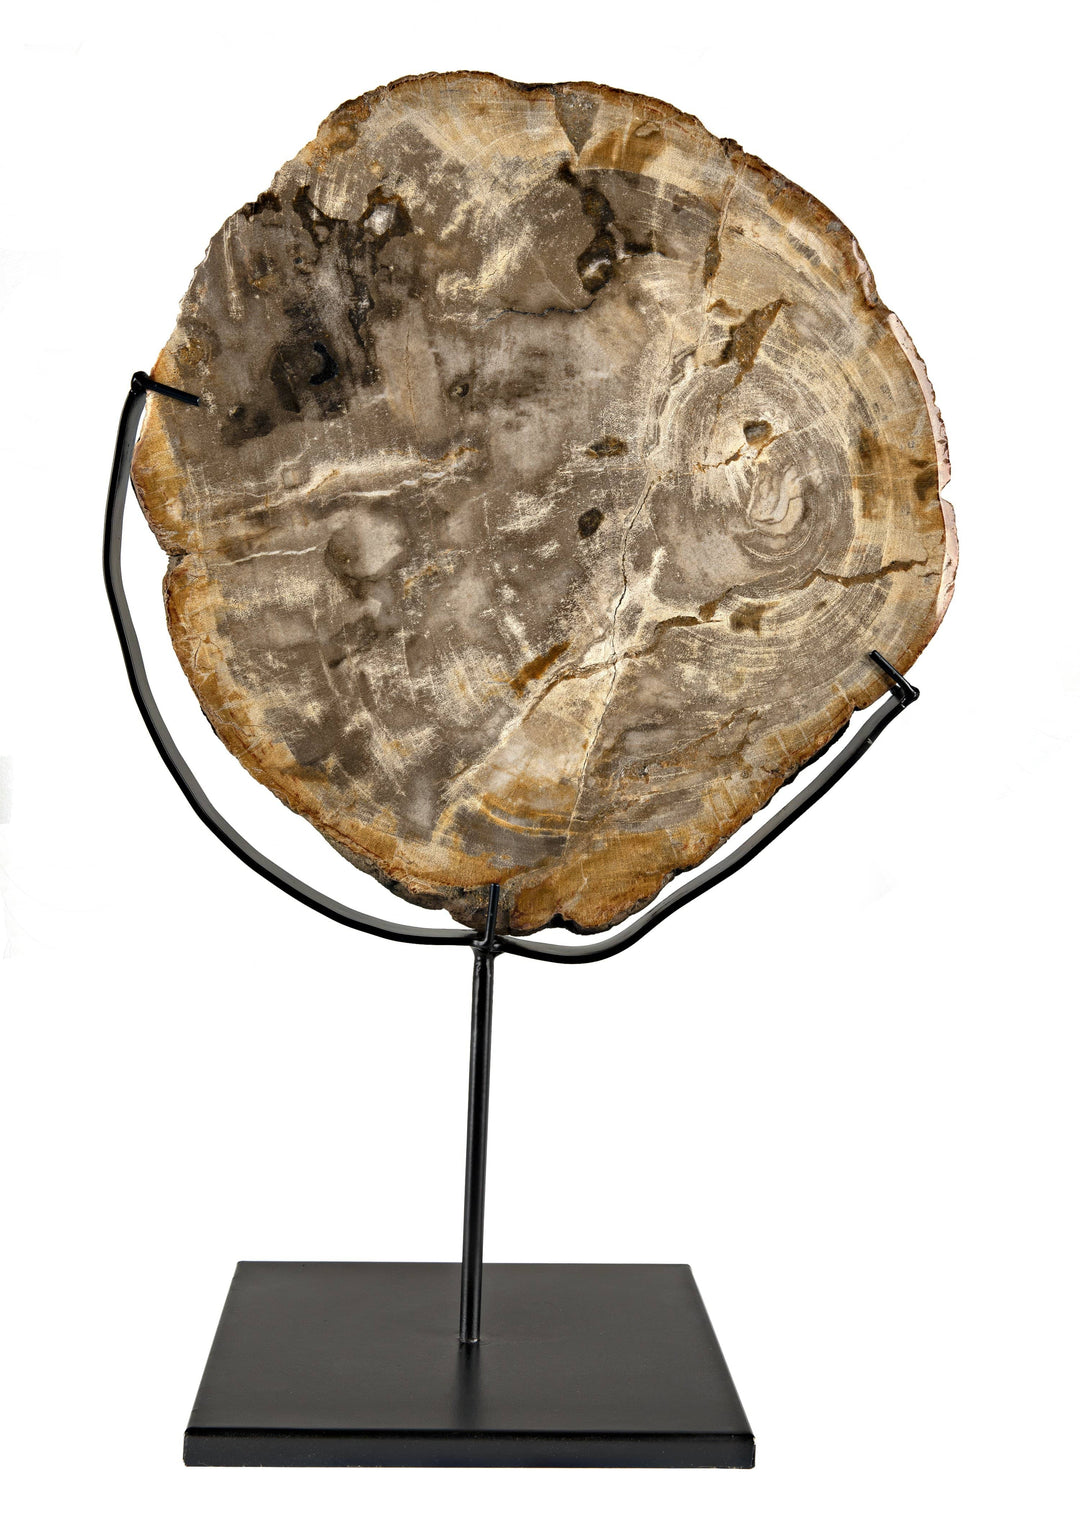 Wood Fossil Sculpture - Matte Black Base (Available in 2 Sizes)